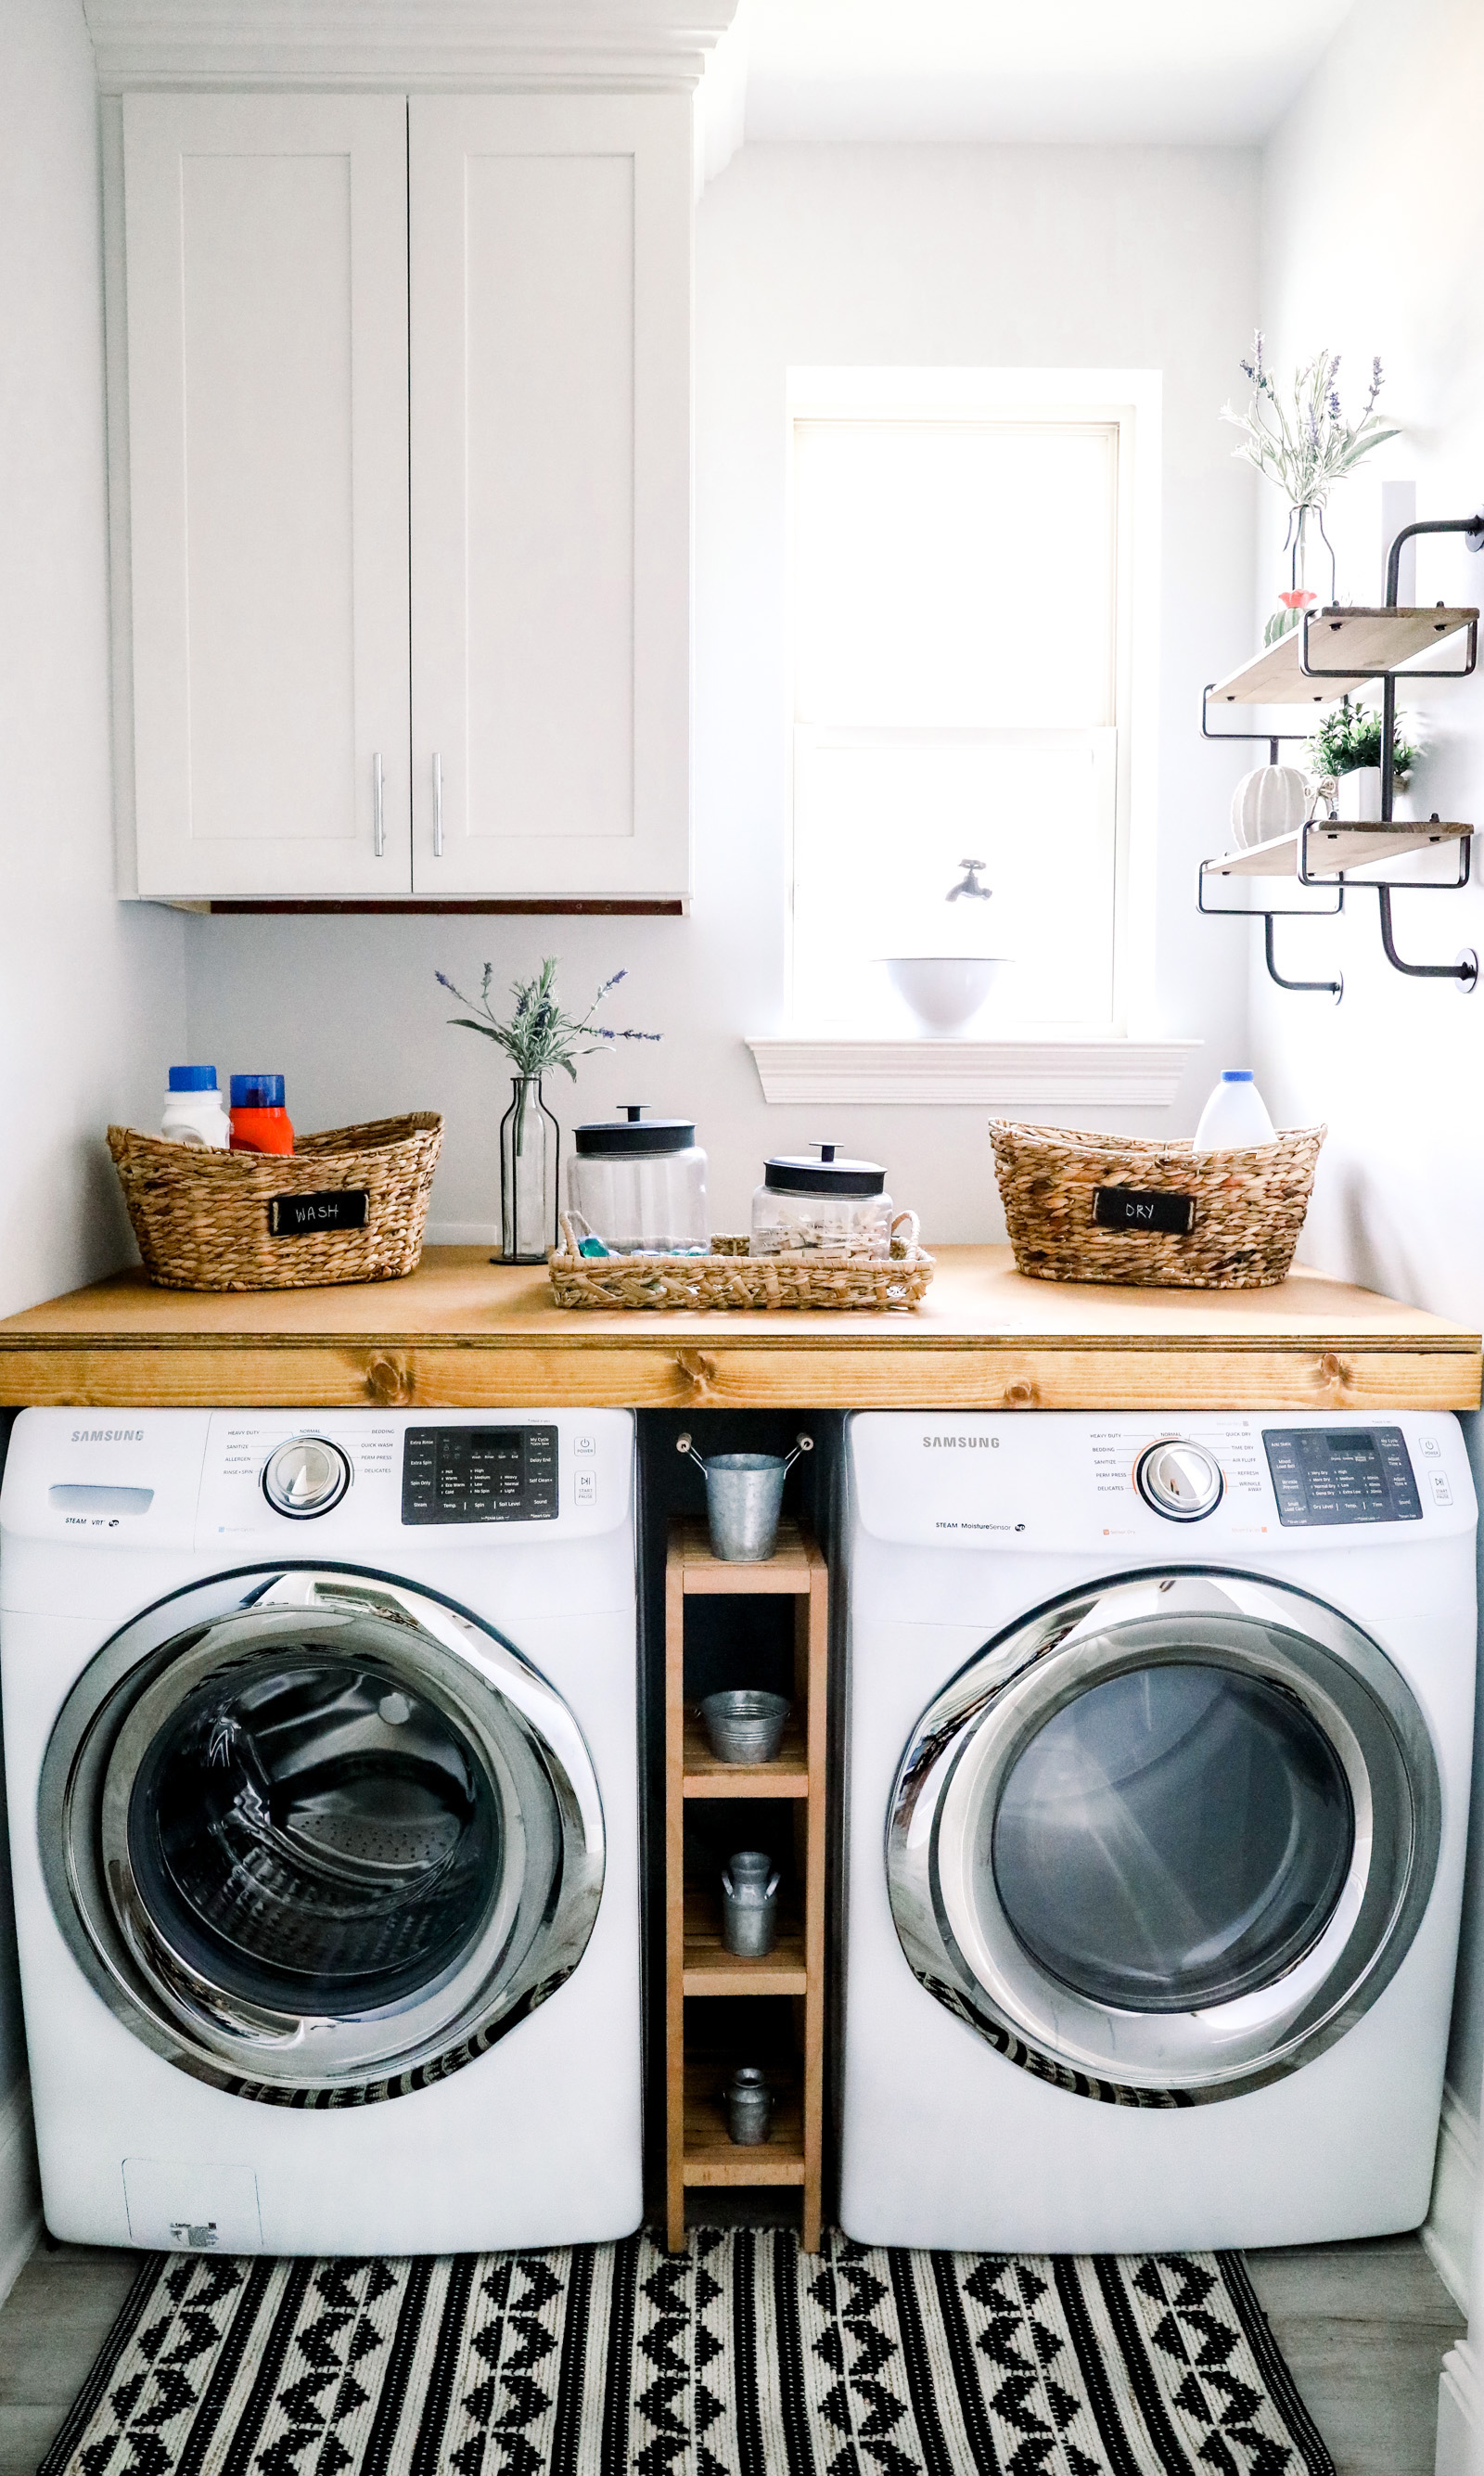 https://www.thesouthernthing.com/wp-content/uploads/2019/07/laundry-room.jpg